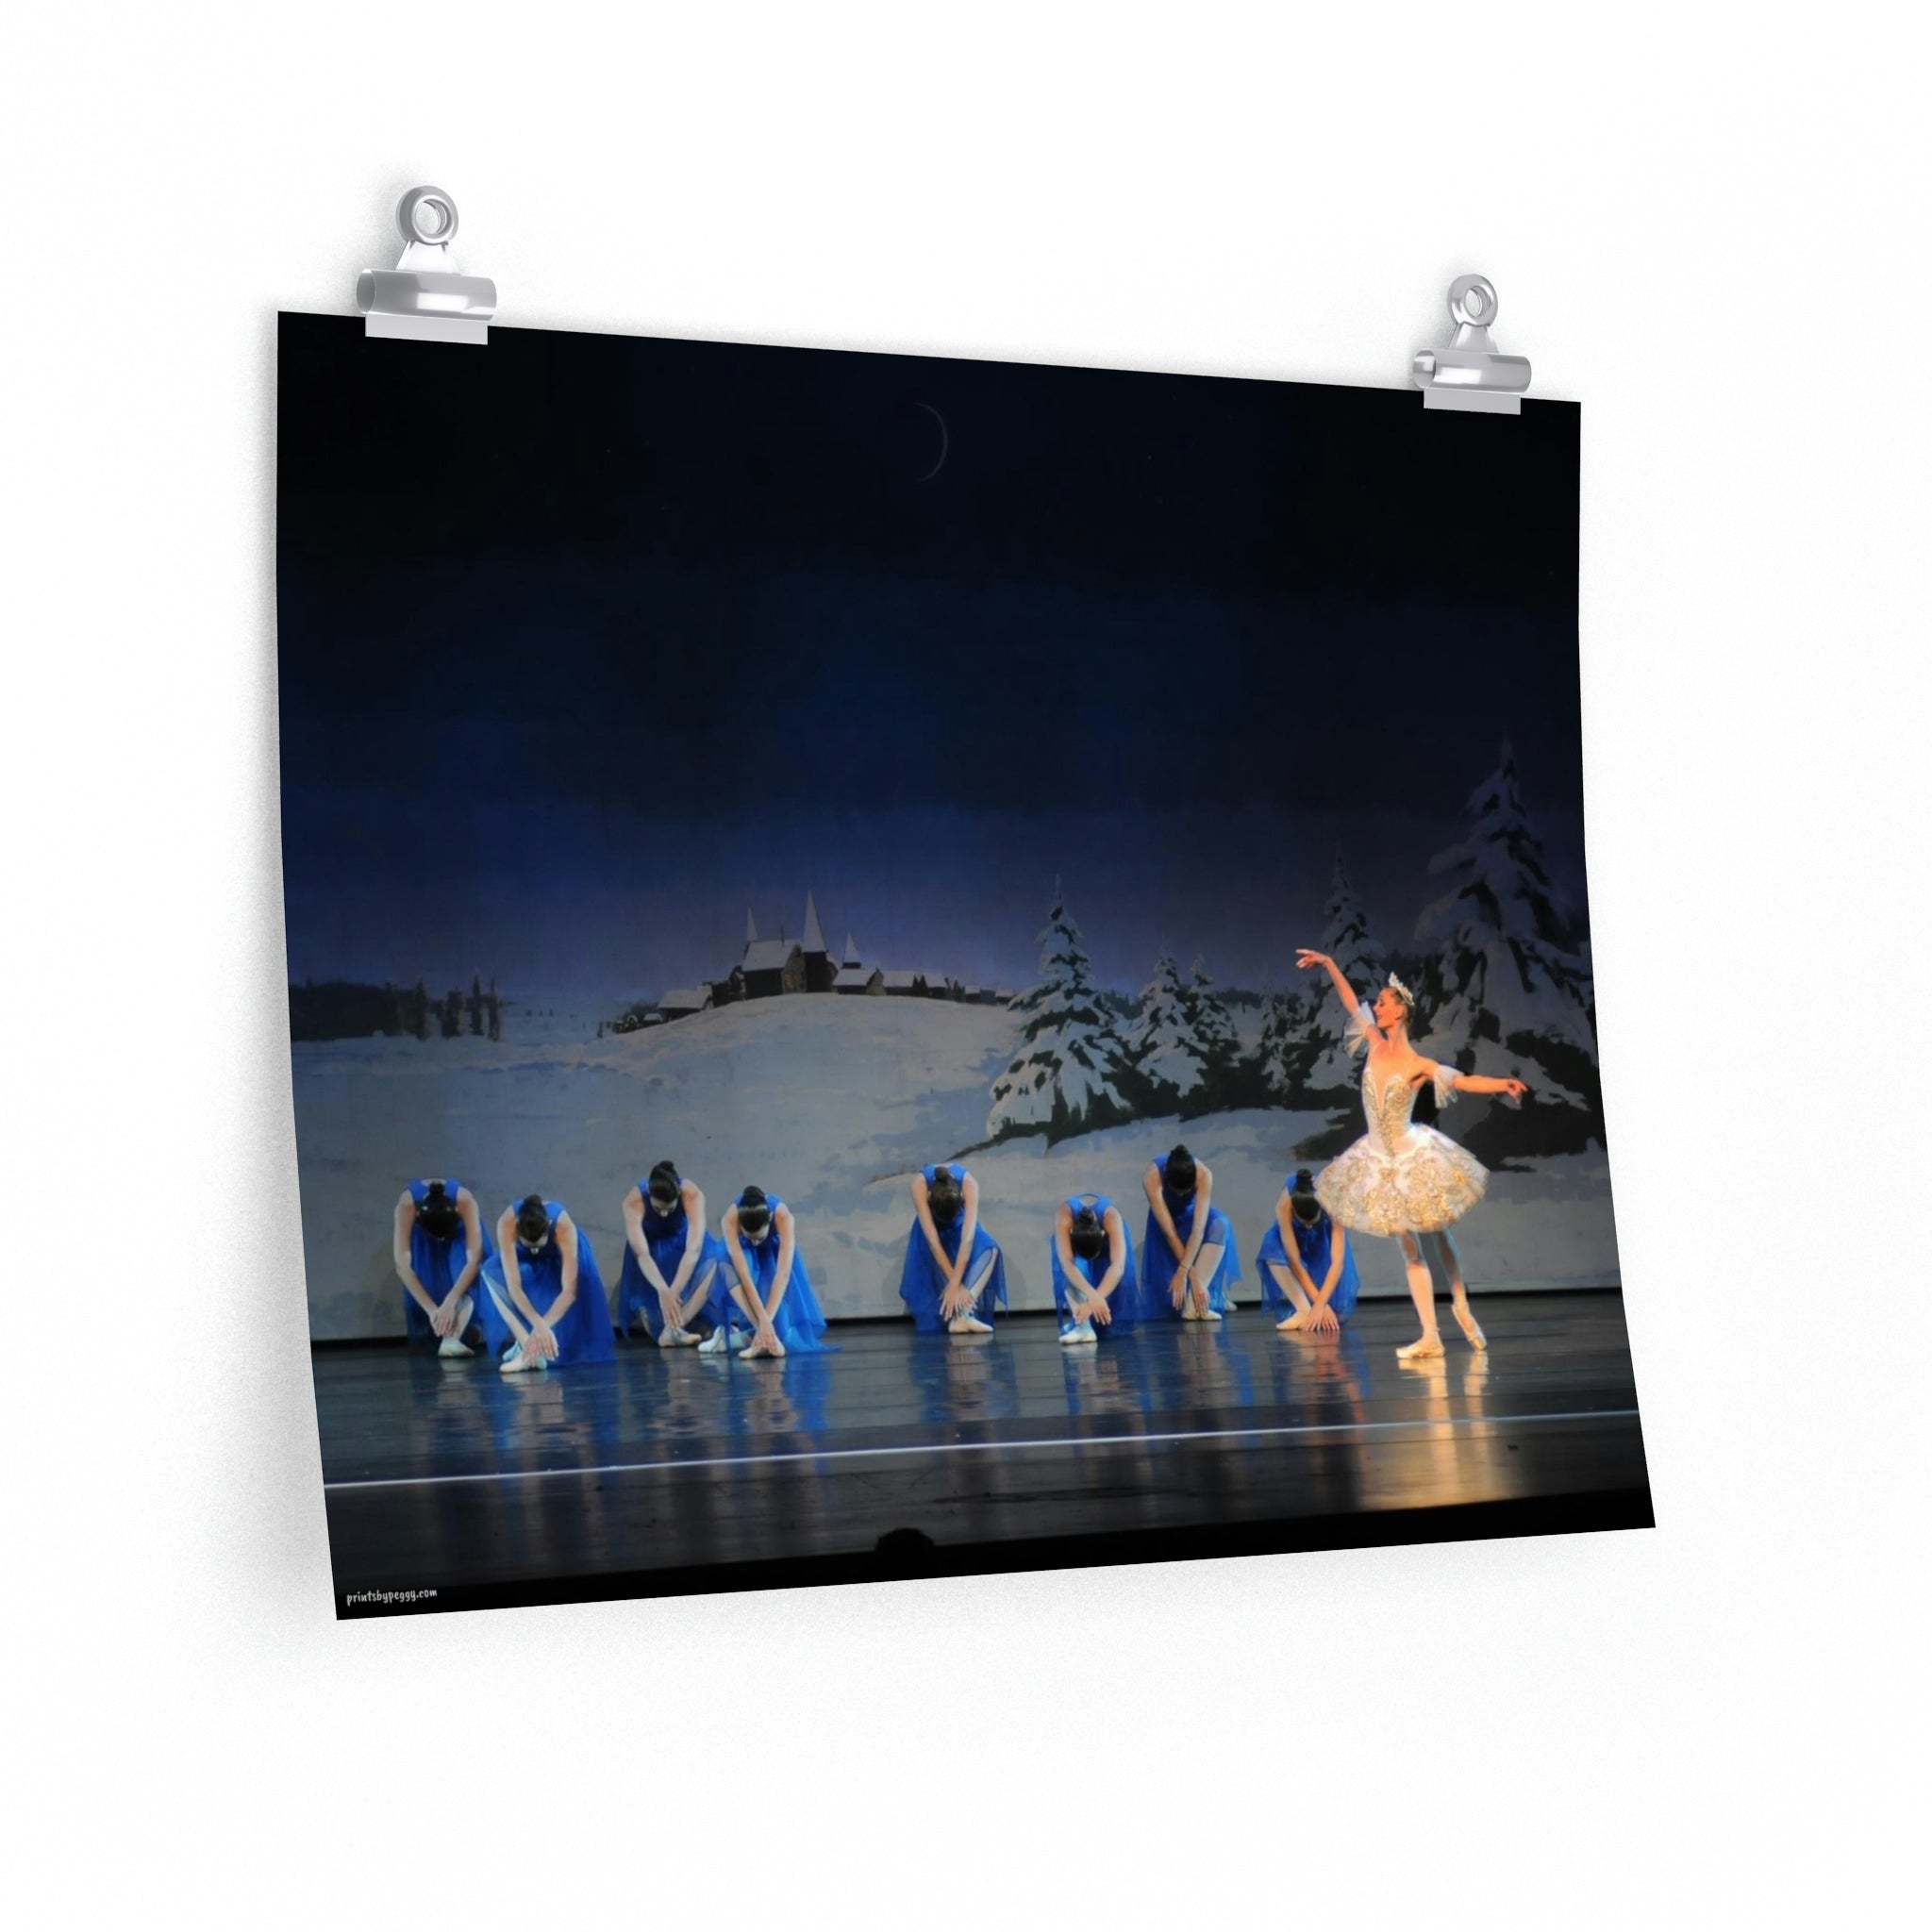 Prima ballerina performing on stage with 8 girls dressed in bright blue and a winter scene backdrop